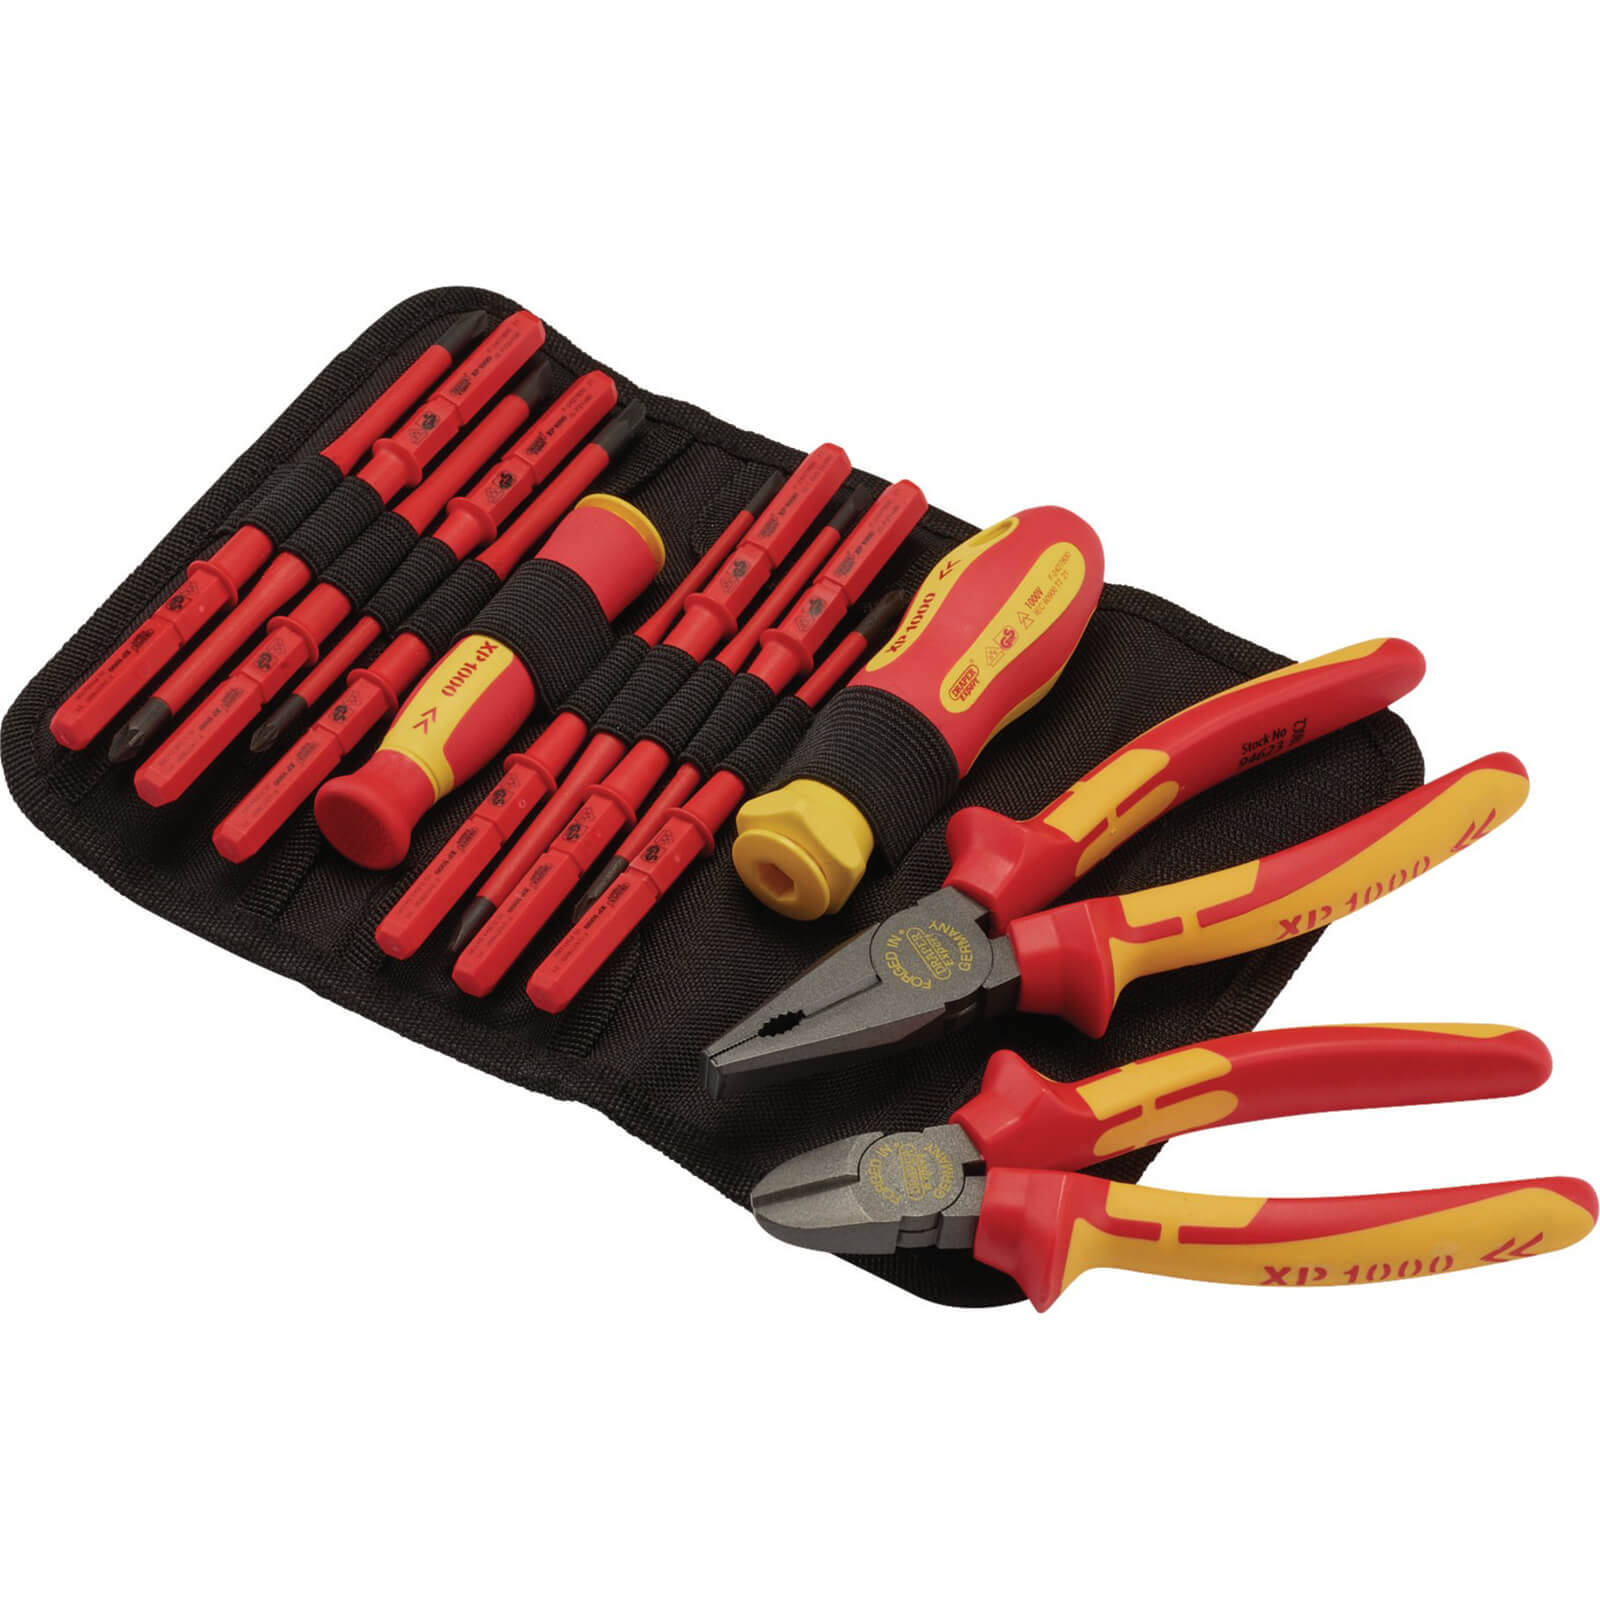 Image of Draper 14 Piece XP1000 VDE Insulated Screwdriver and Pliers Set